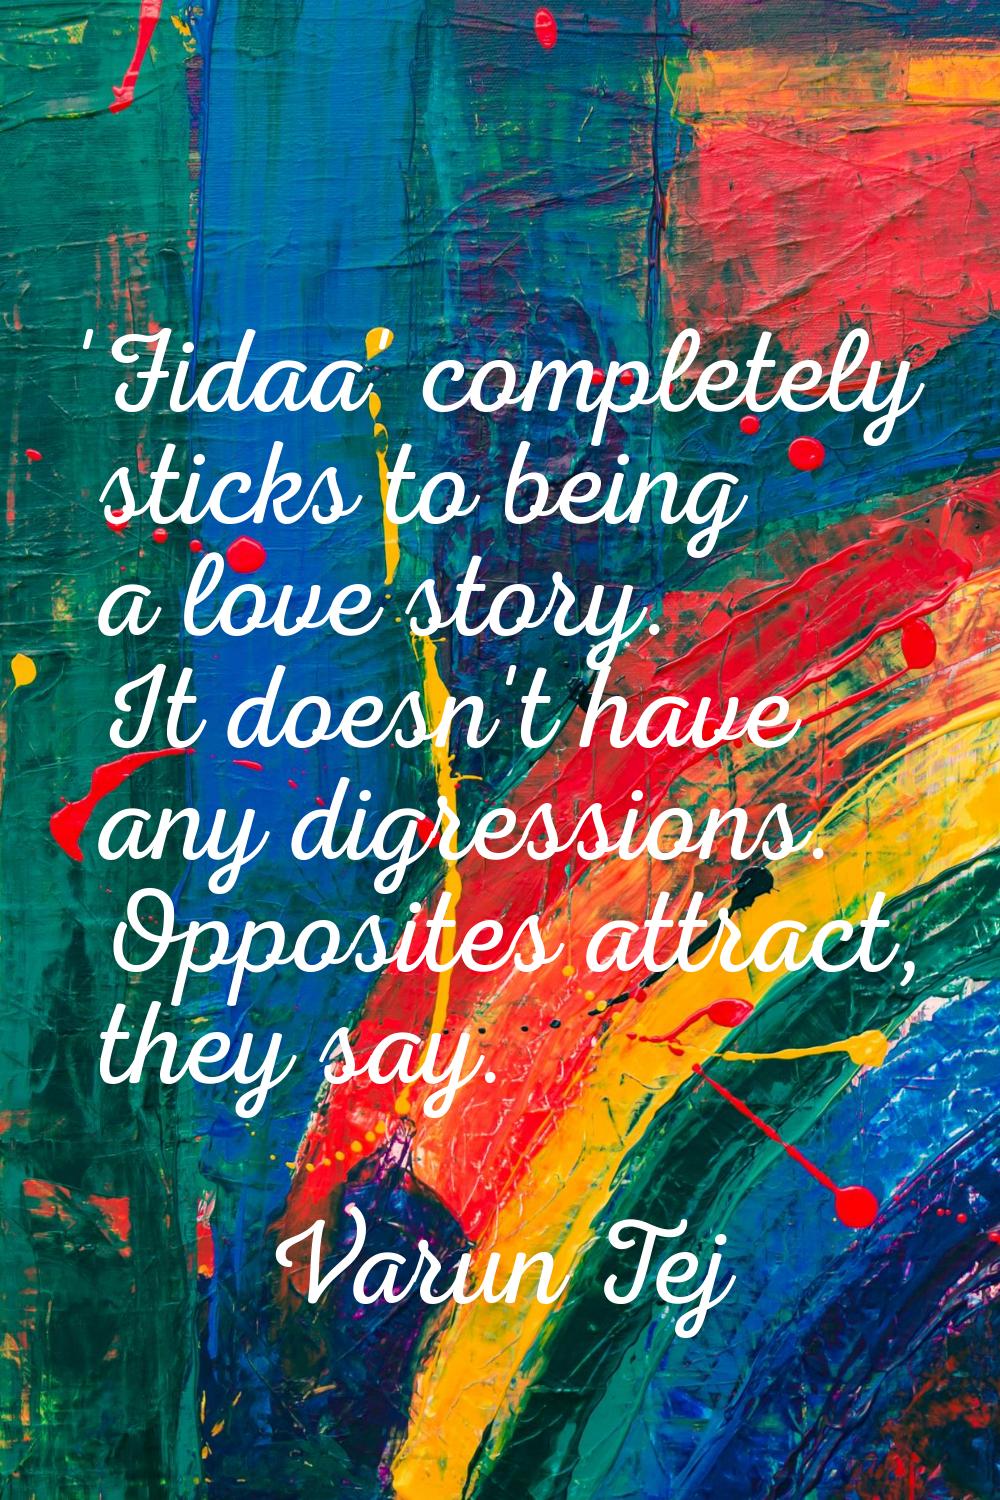 'Fidaa' completely sticks to being a love story. It doesn't have any digressions. Opposites attract